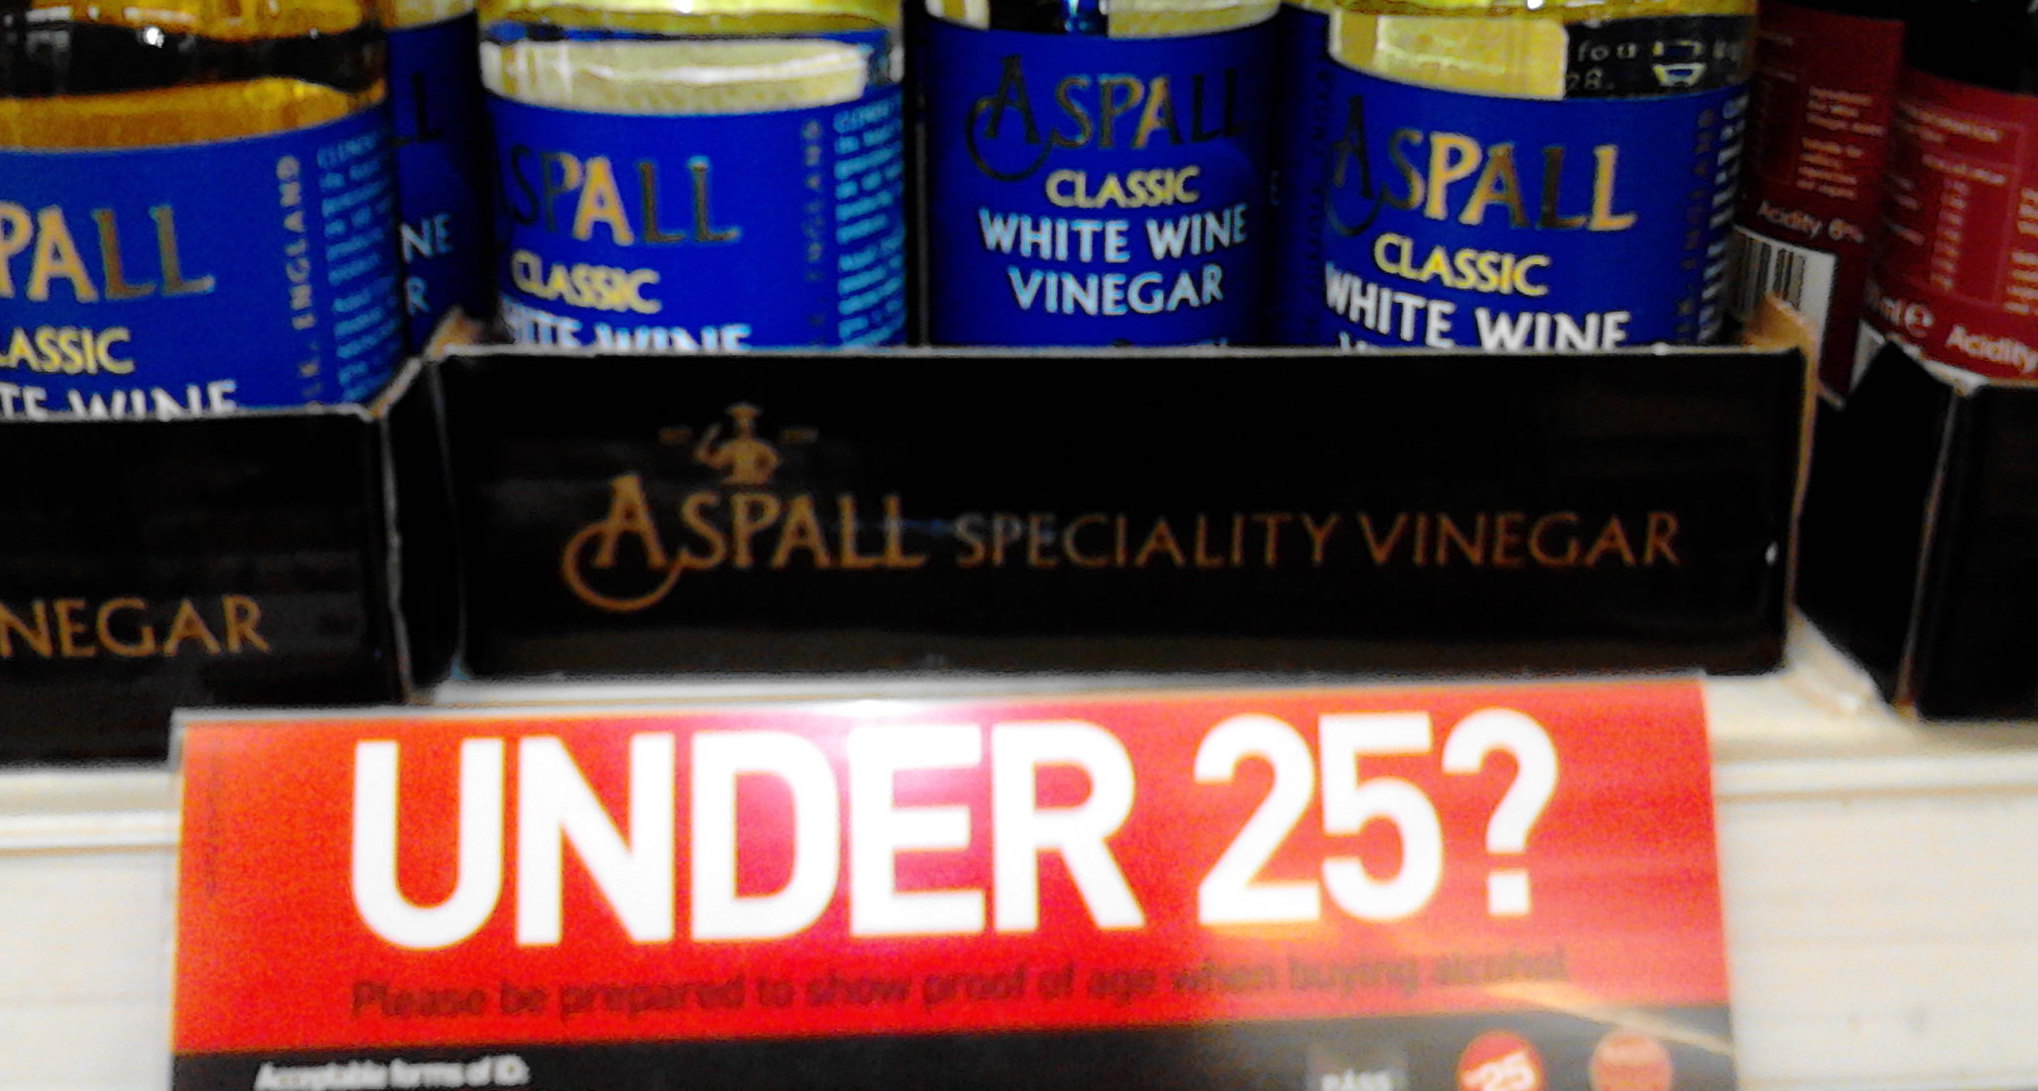 Under 25? Please be prepared to show proof of age when buying alcohol